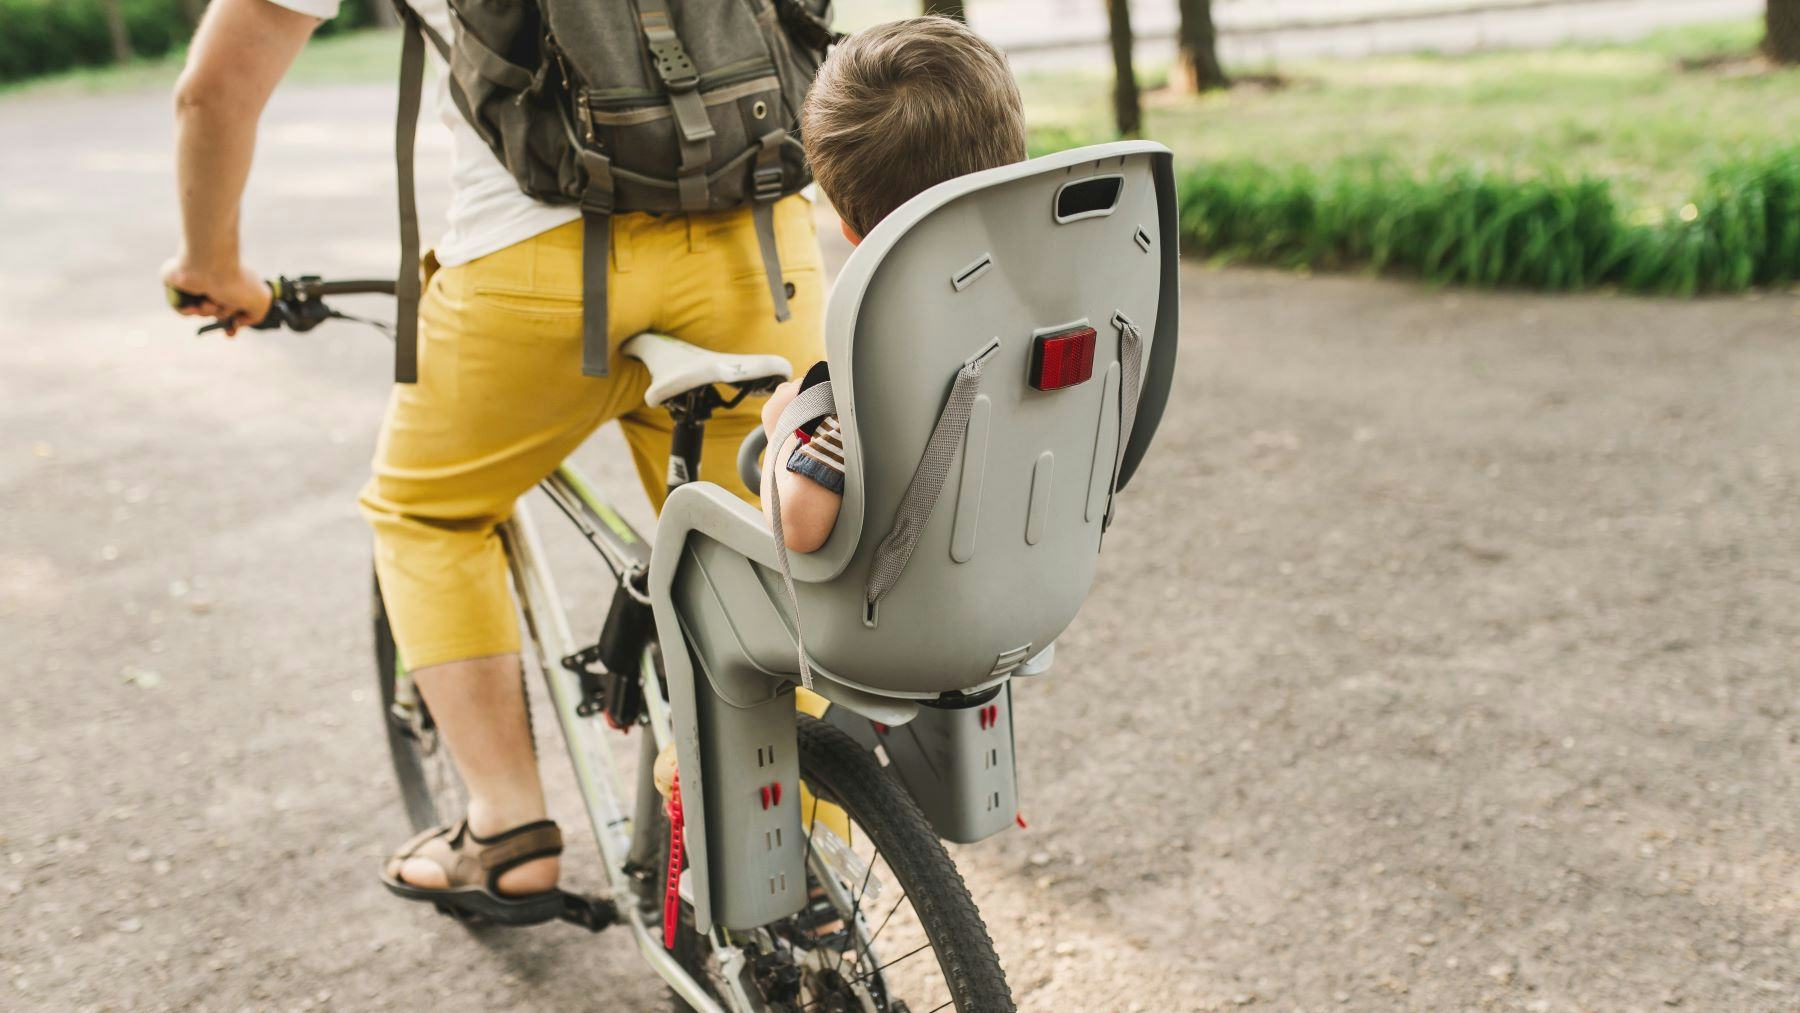 EN 14344: European standard for child seats used on bicycles